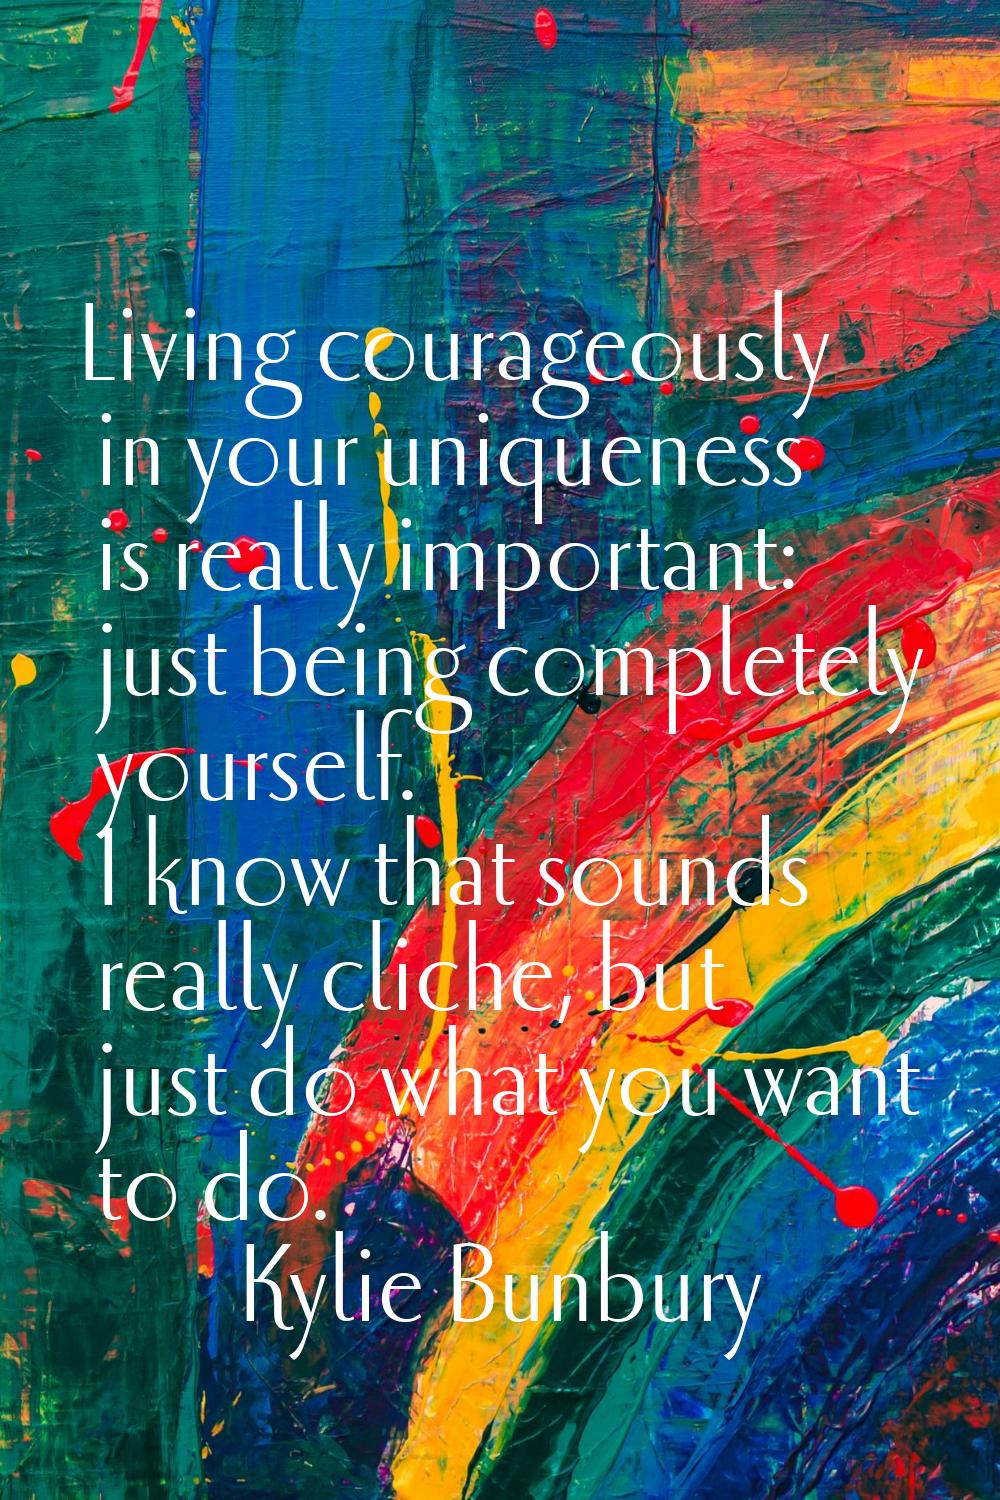 Living courageously in your uniqueness is really important: just being completely yourself. I know 